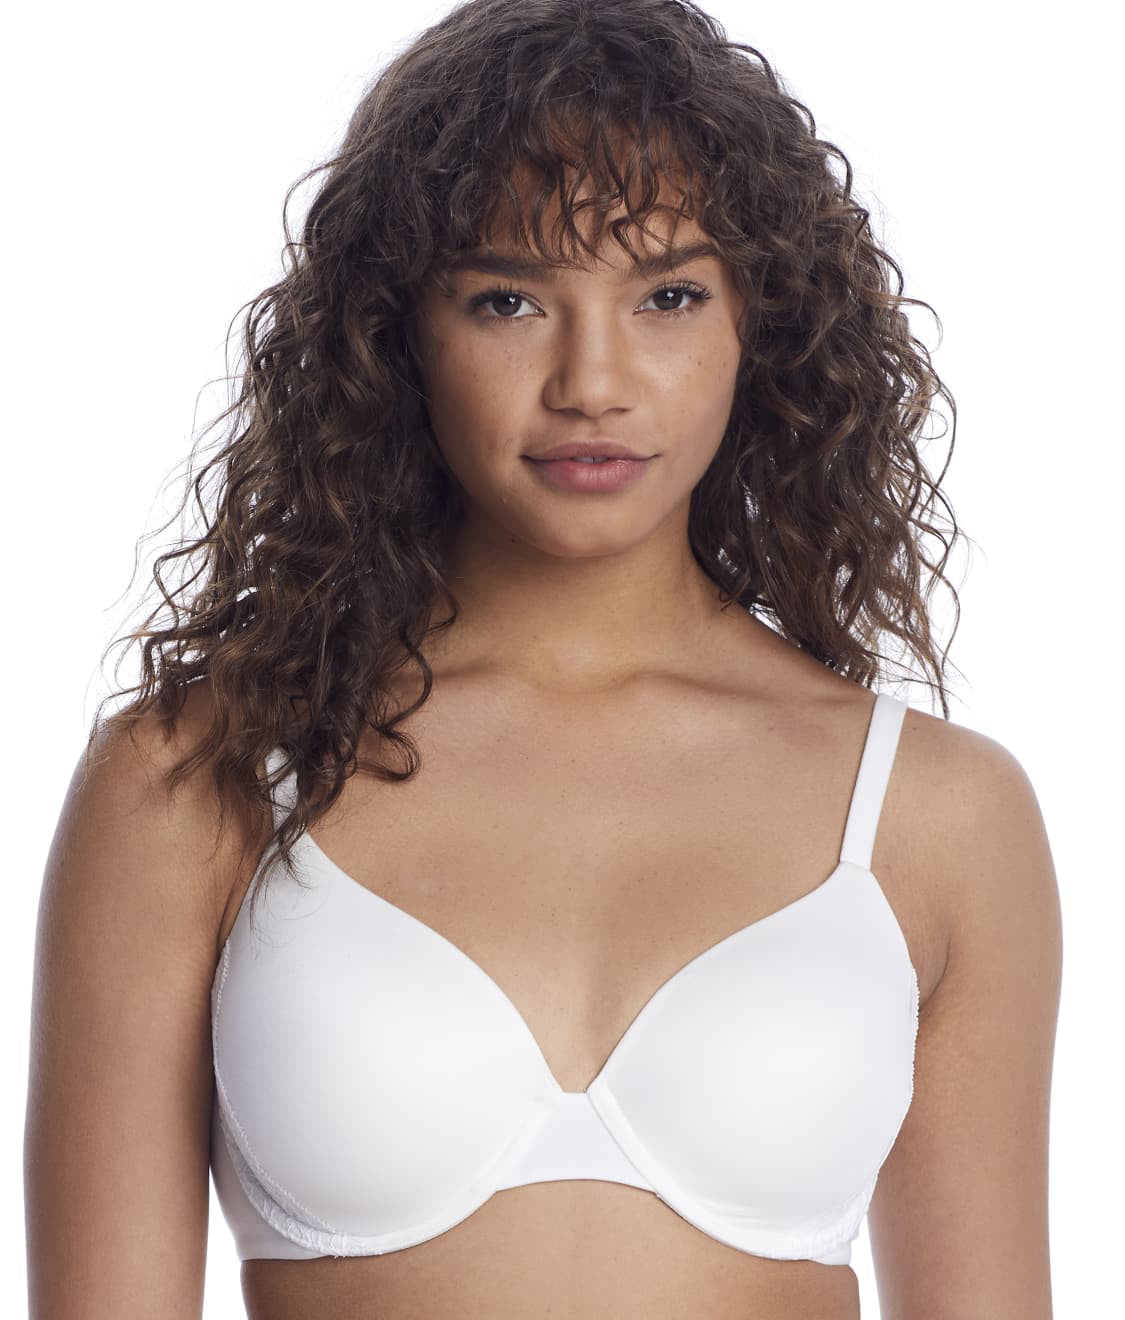 REVEAL Pearl White The Perfect Support Underwire Bra, US 36DDD, UK 36E, NWOT